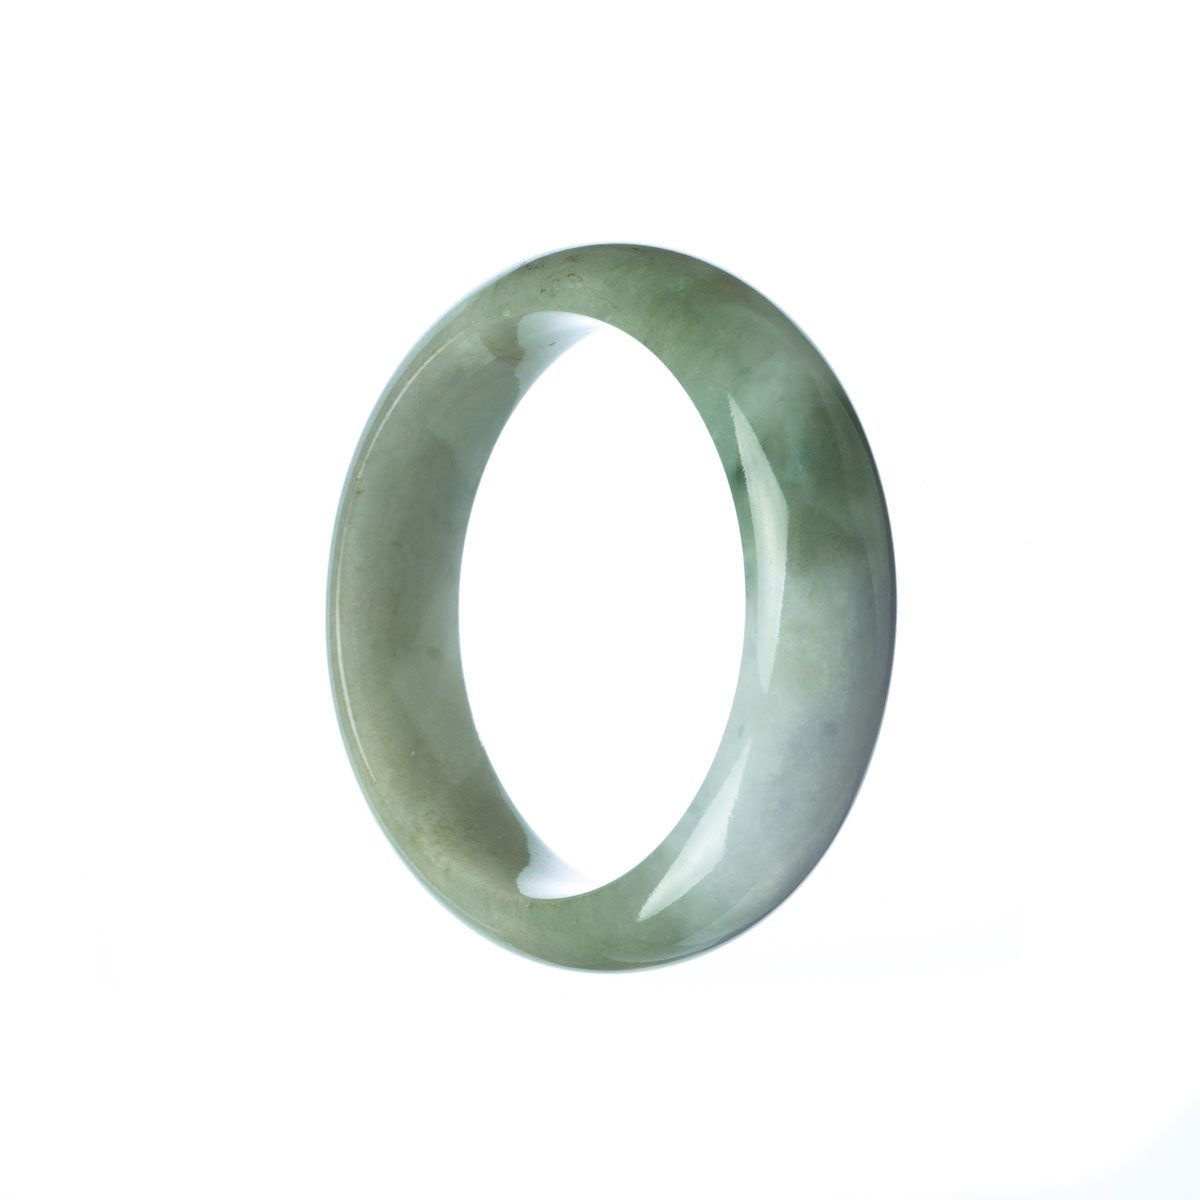 A close-up image of a half moon-shaped green jade bracelet, specifically designed for children. The jade is untreated, giving it an authentic appearance. The bracelet is sold by MAYS GEMS.